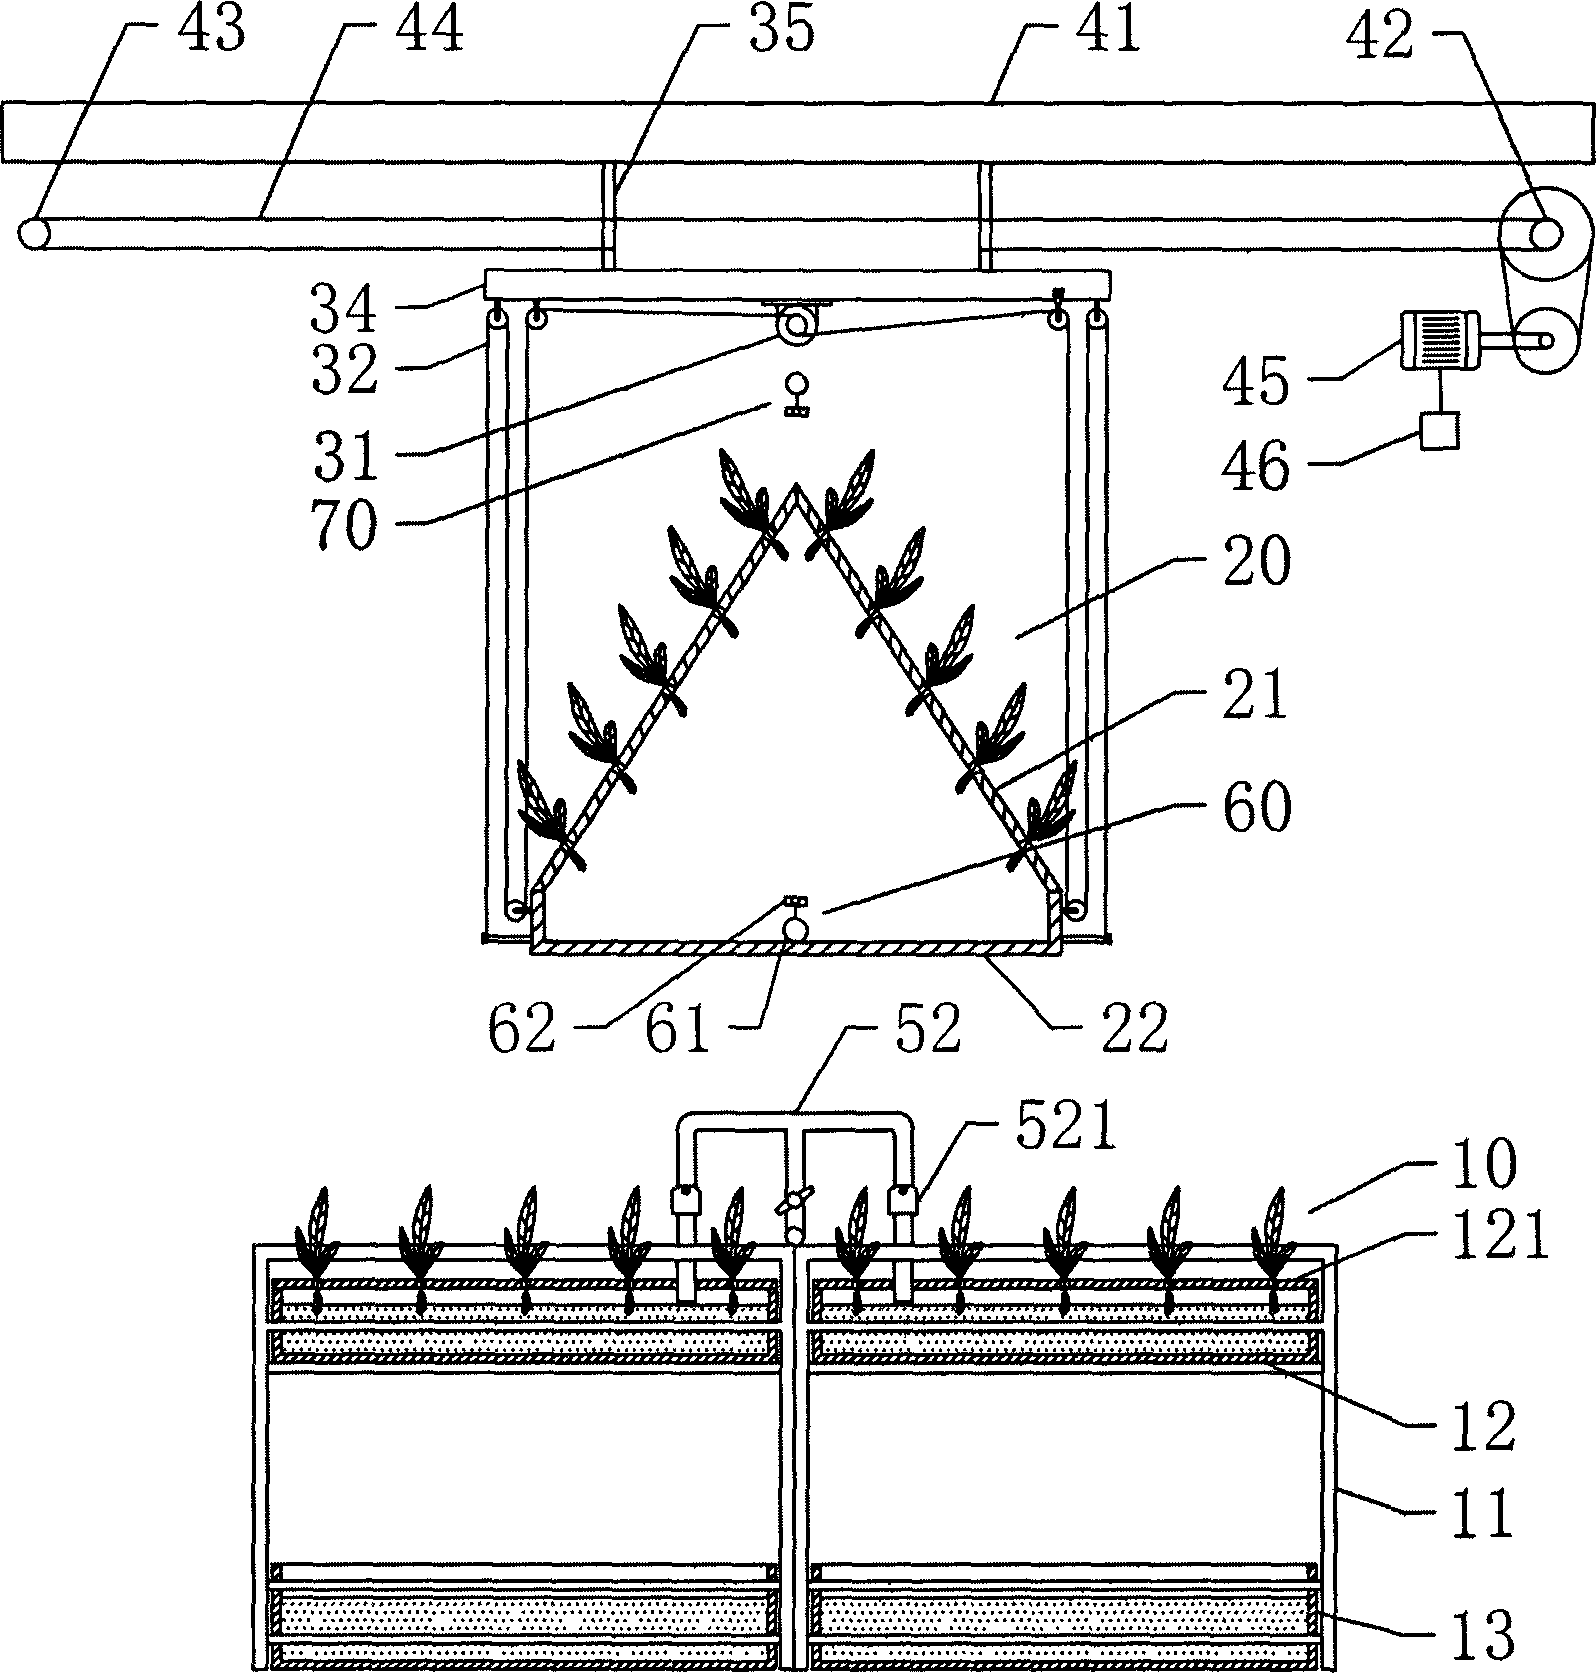 Automated stereoscopic soilless culture system